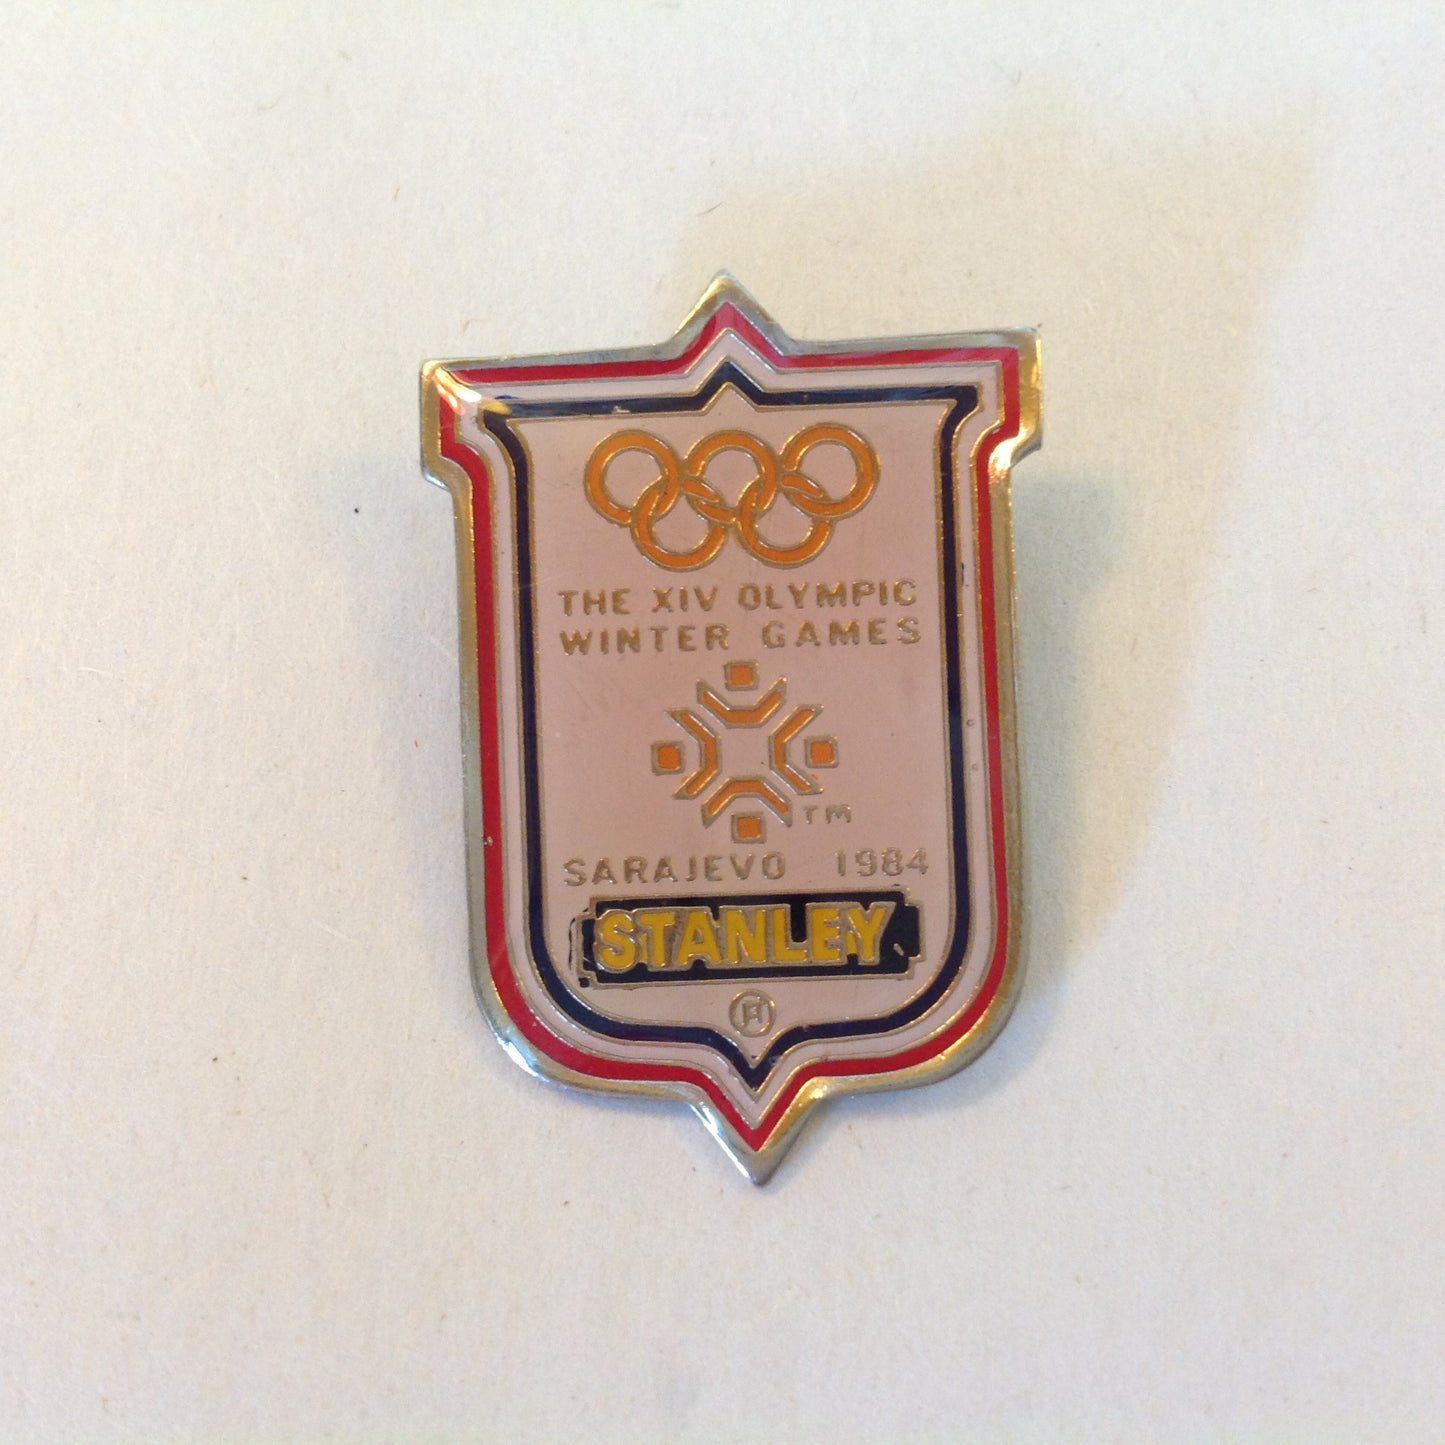 Vintage Stanley XIV Olympic Winter Games Sarajevo 1984 Promotional Pin Brooch